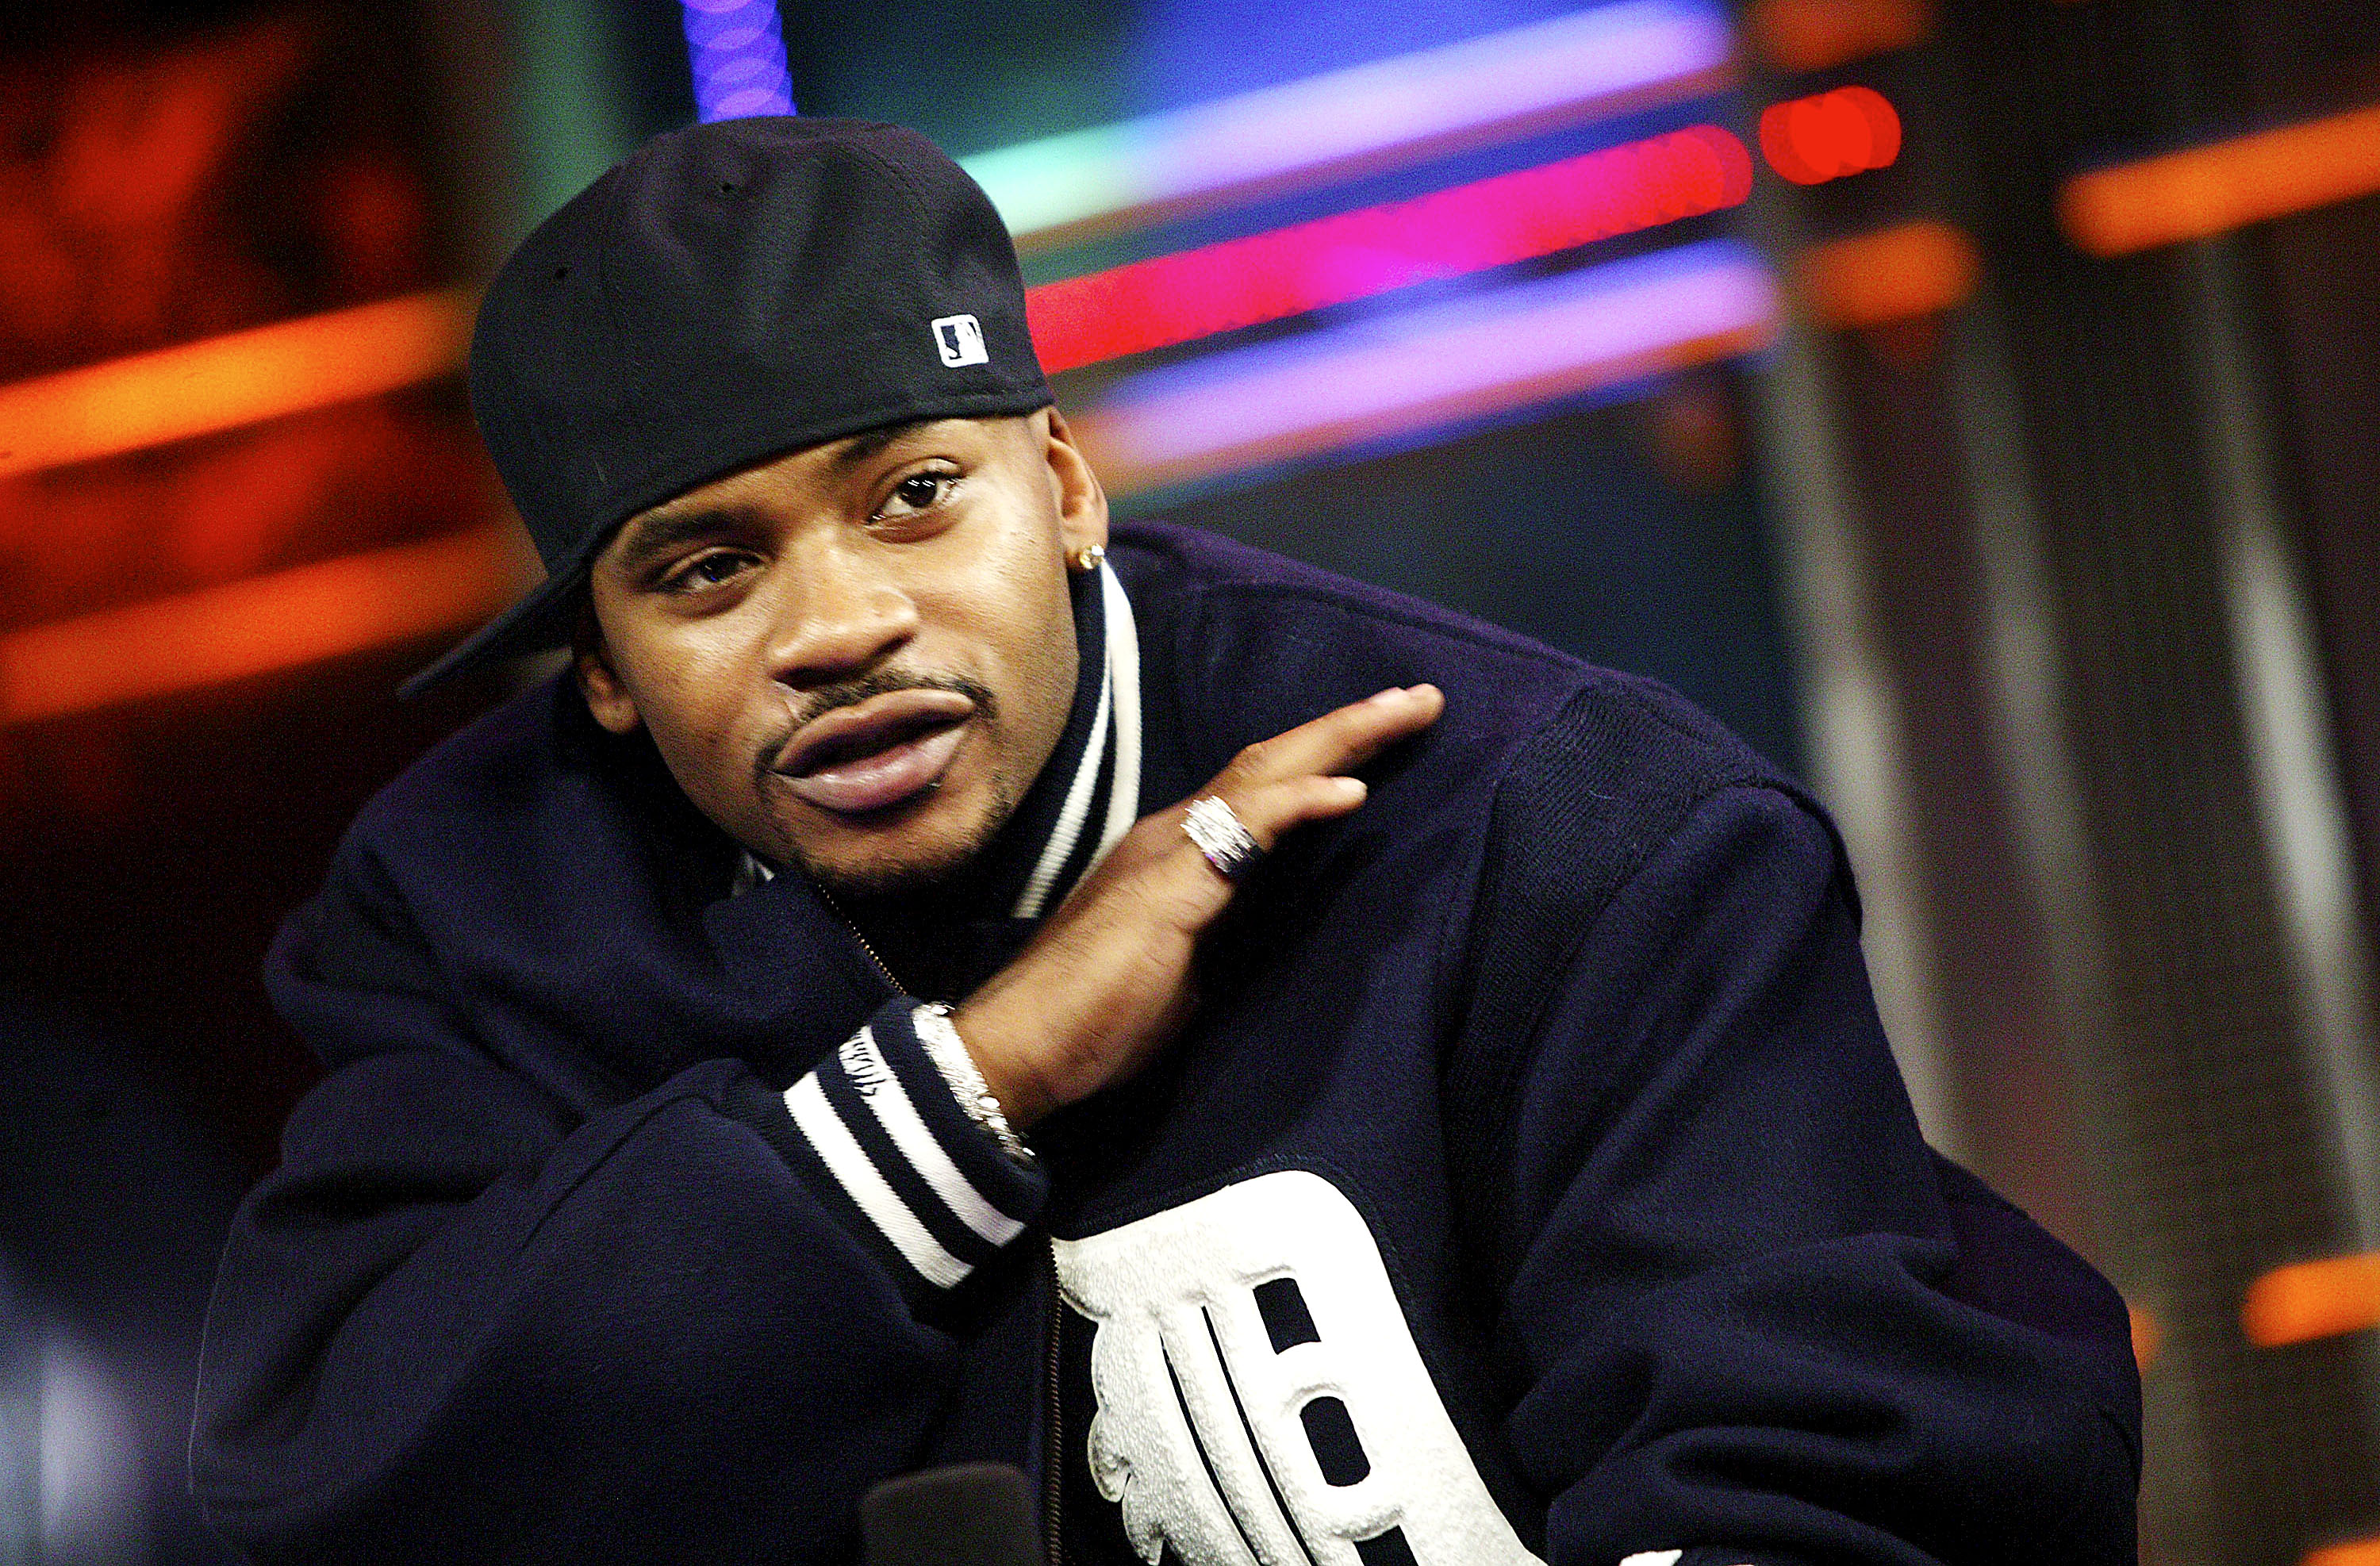 Obie Trice Arrested For Aggravated Felony Assault & Restraining Order Violation